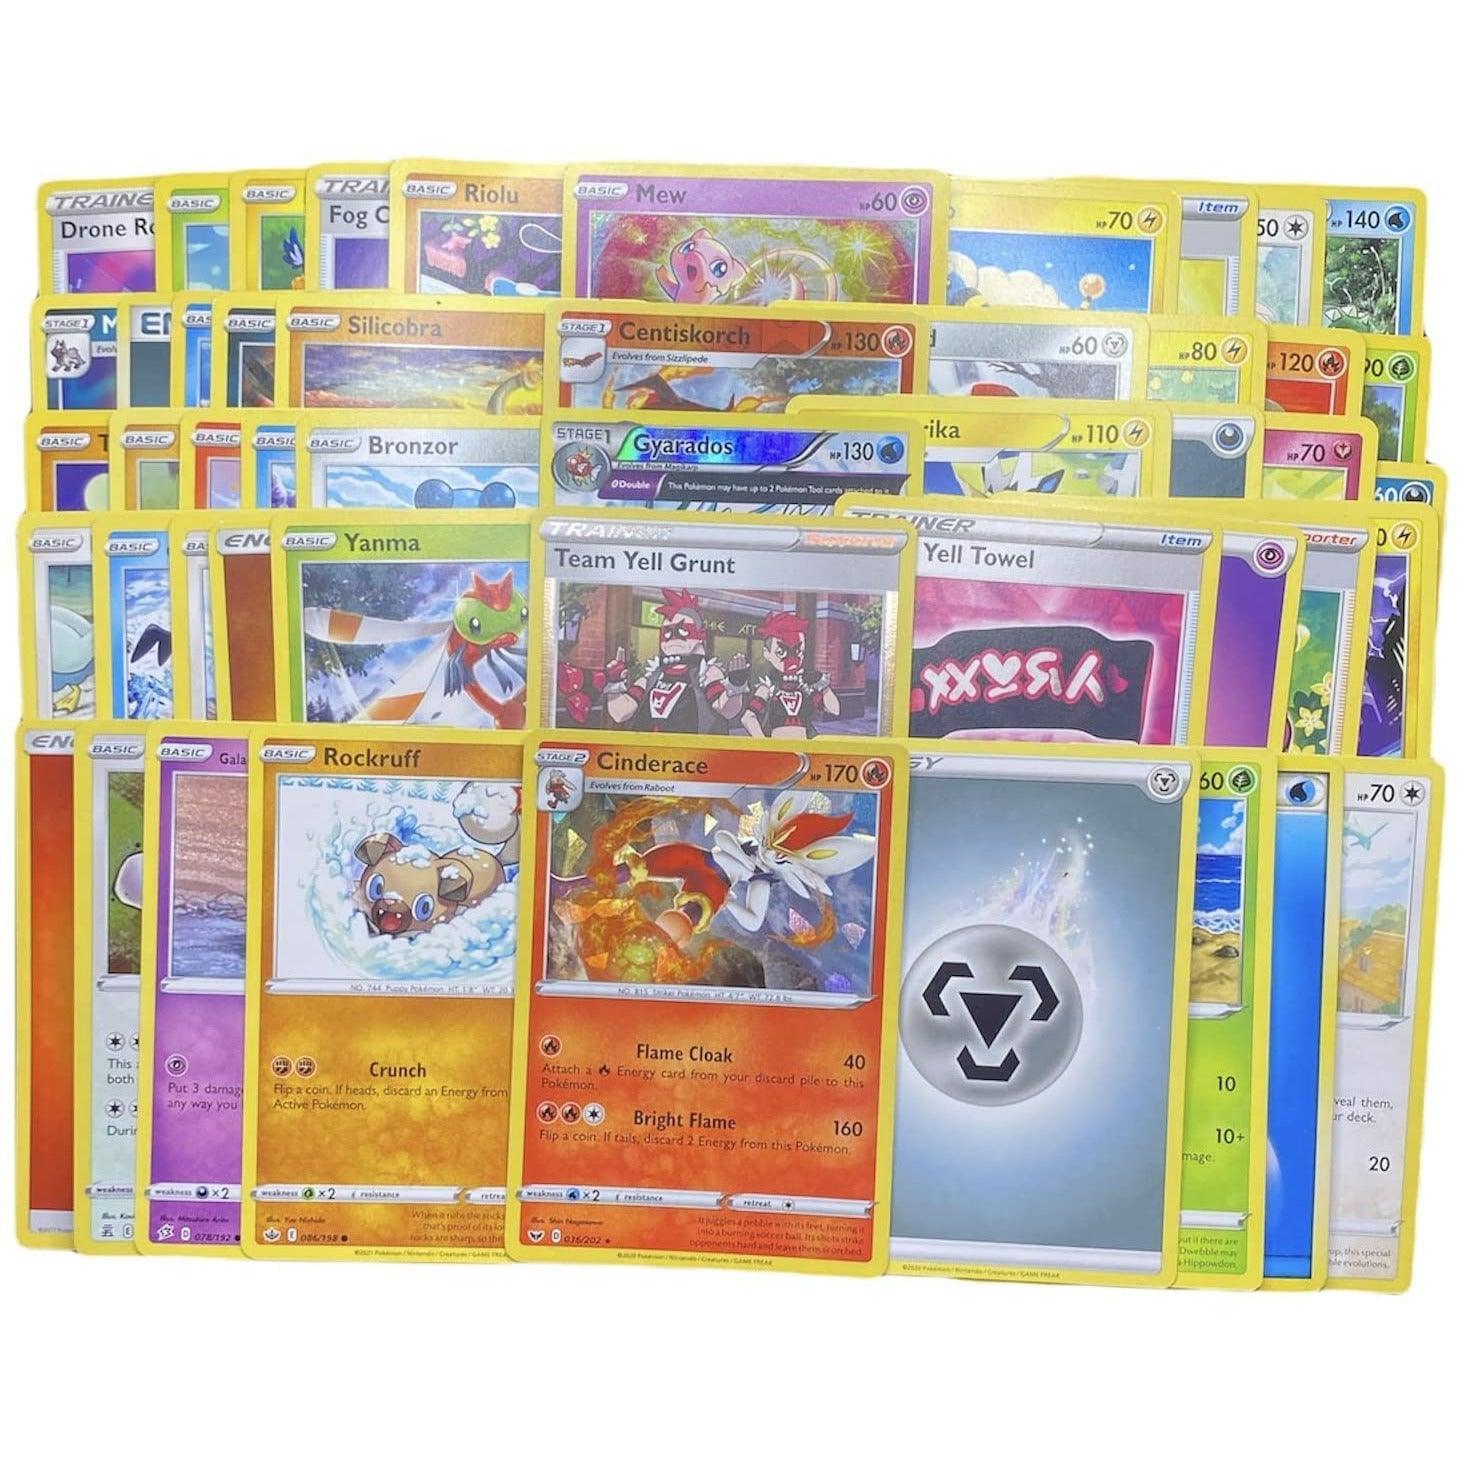 Pokémon Assorted Cards, 50 Cards Authentic Pokemon Cards 100% - BumbleToys - 8-13 Years, Boys, Card & Board Games, Pokémon, Pre-Order, Puzzle & Board & Card Games